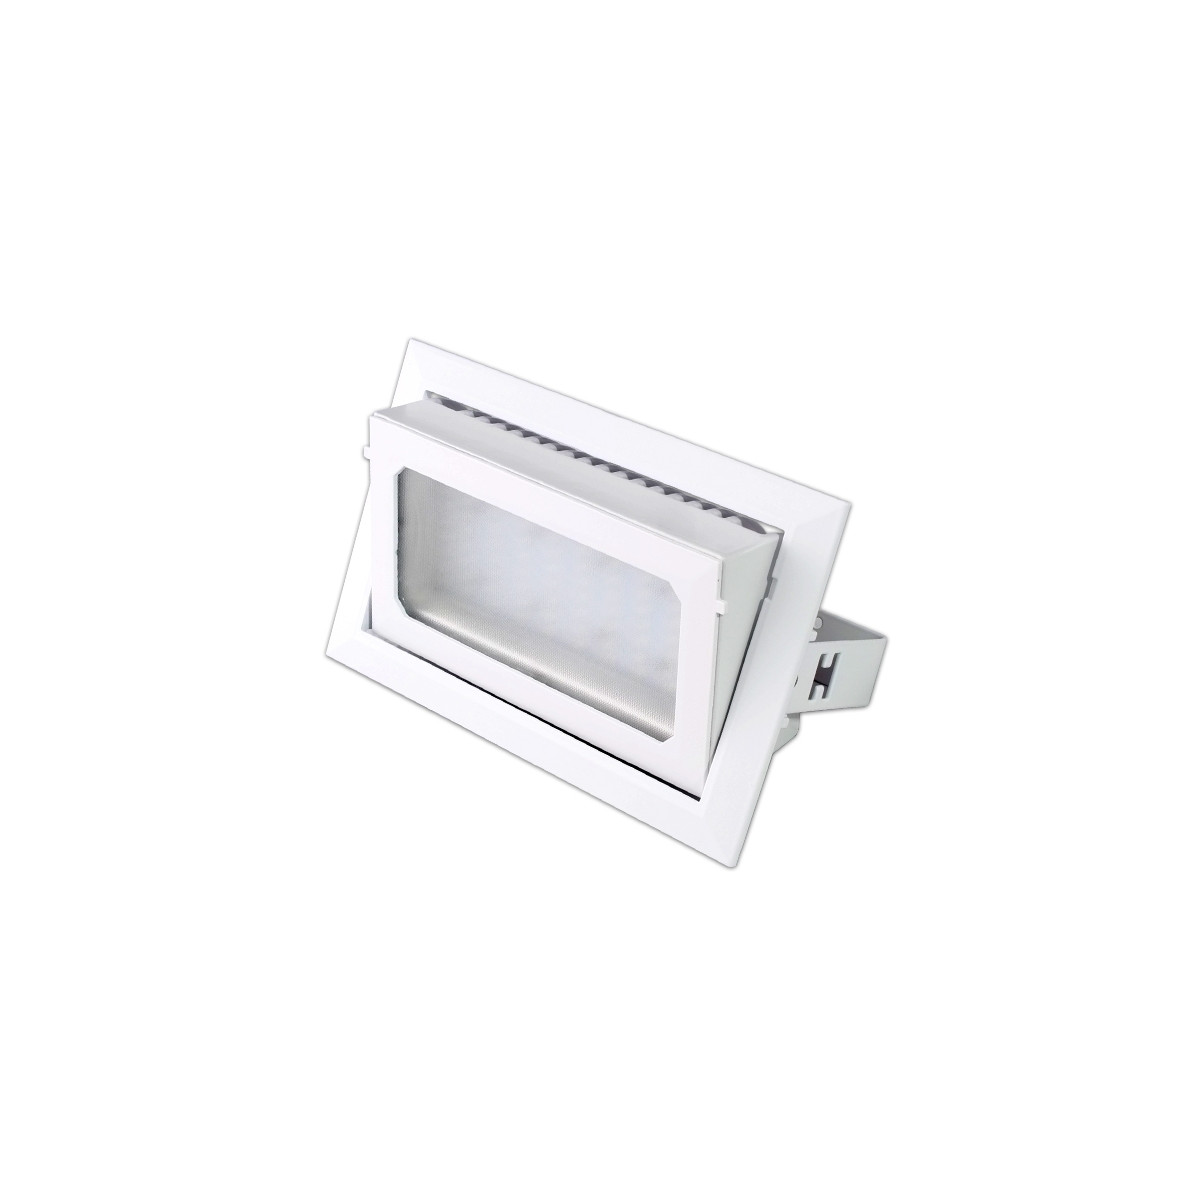 Ceiling Floodlight - 30W, Directional, Square